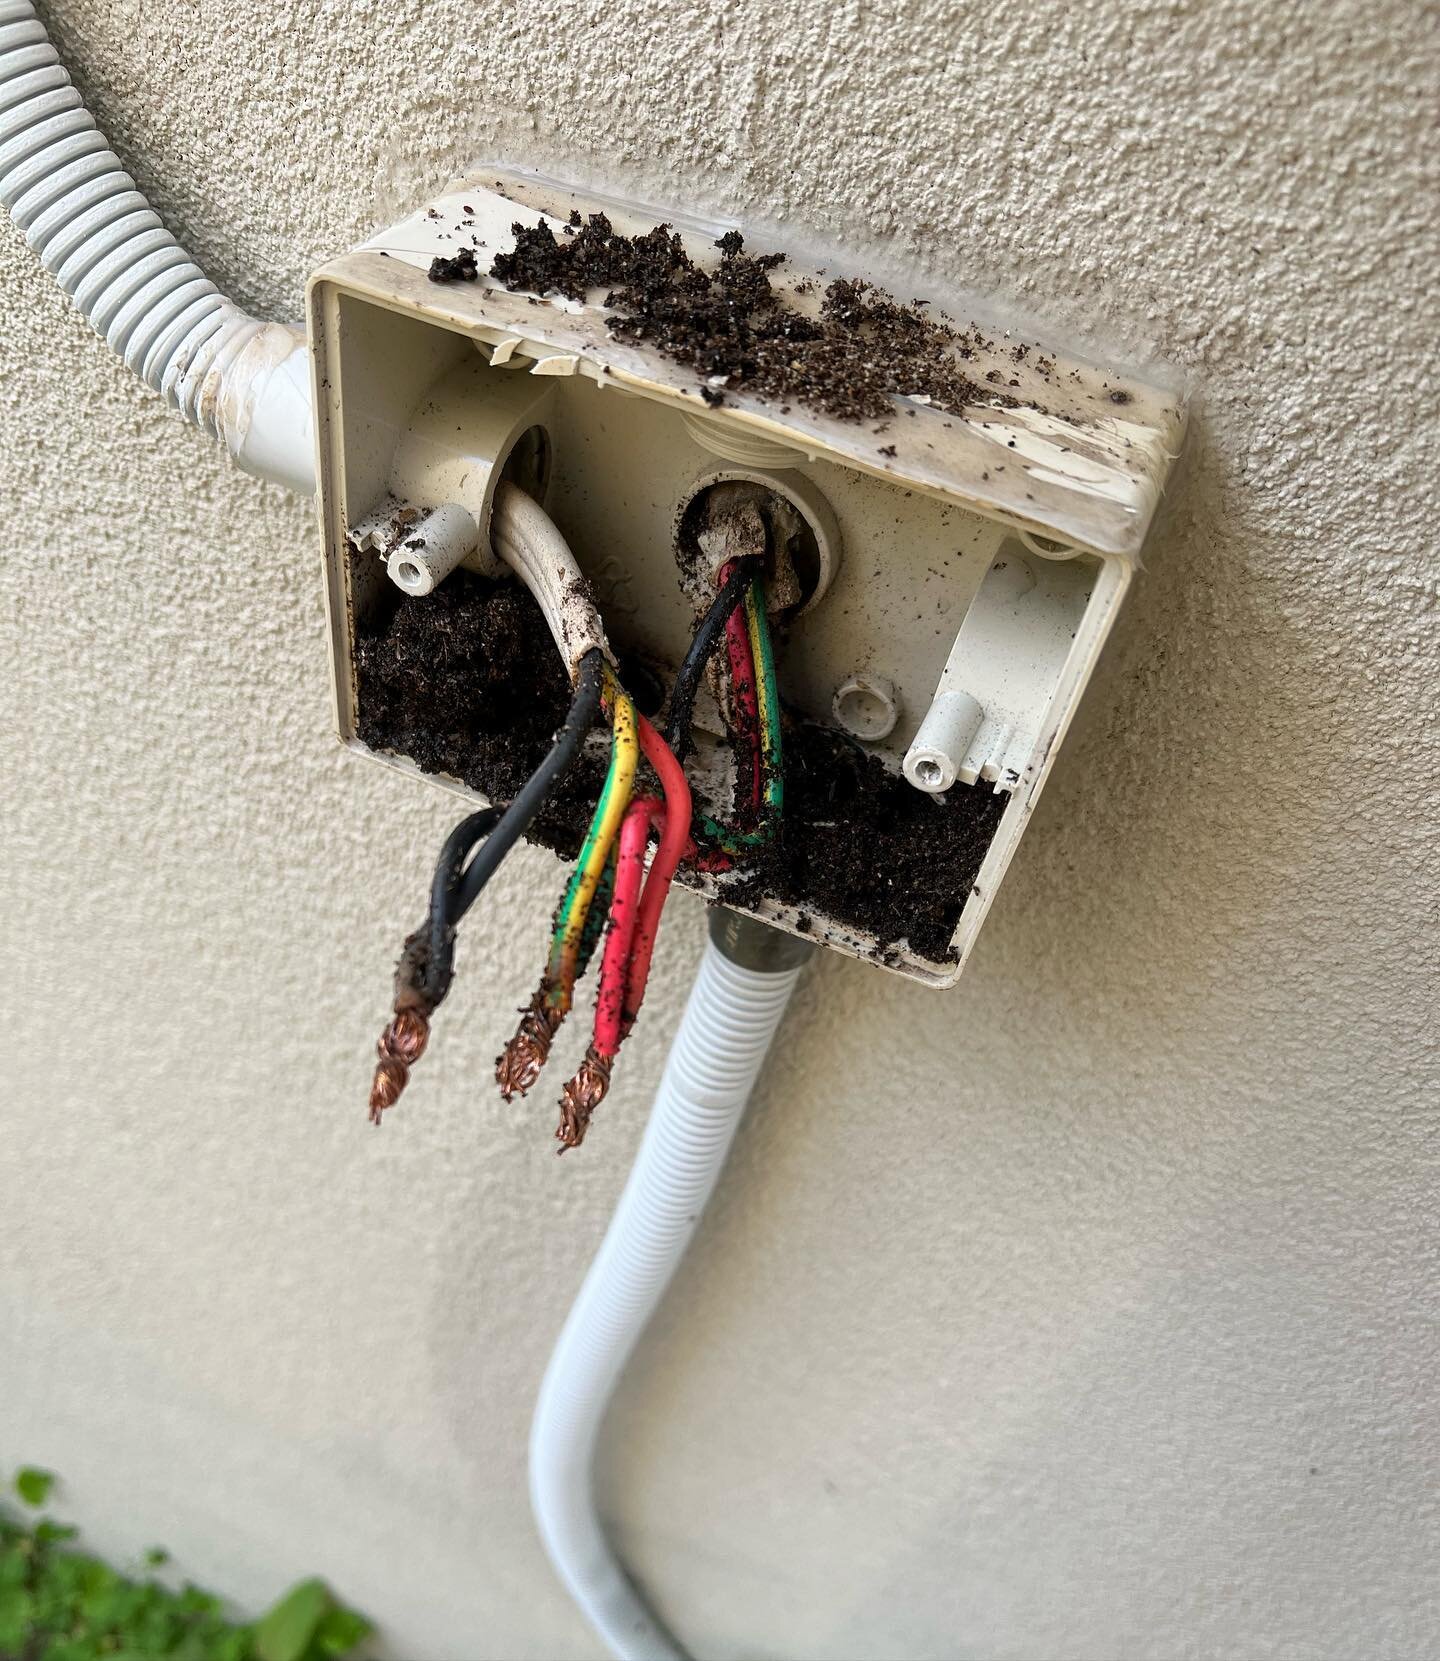 Can you take a guess what was causing this circuit to trip out? 🧐

&hellip;. 🐜⚡️

📲 0417 129 484 
📧info@templetonelectrical.com.au
💻www.templetonelectrical.com.au
&bull;
&bull;
&bull;
&bull;
&bull;
#electrician #electriciansunshinecoast #sunshin